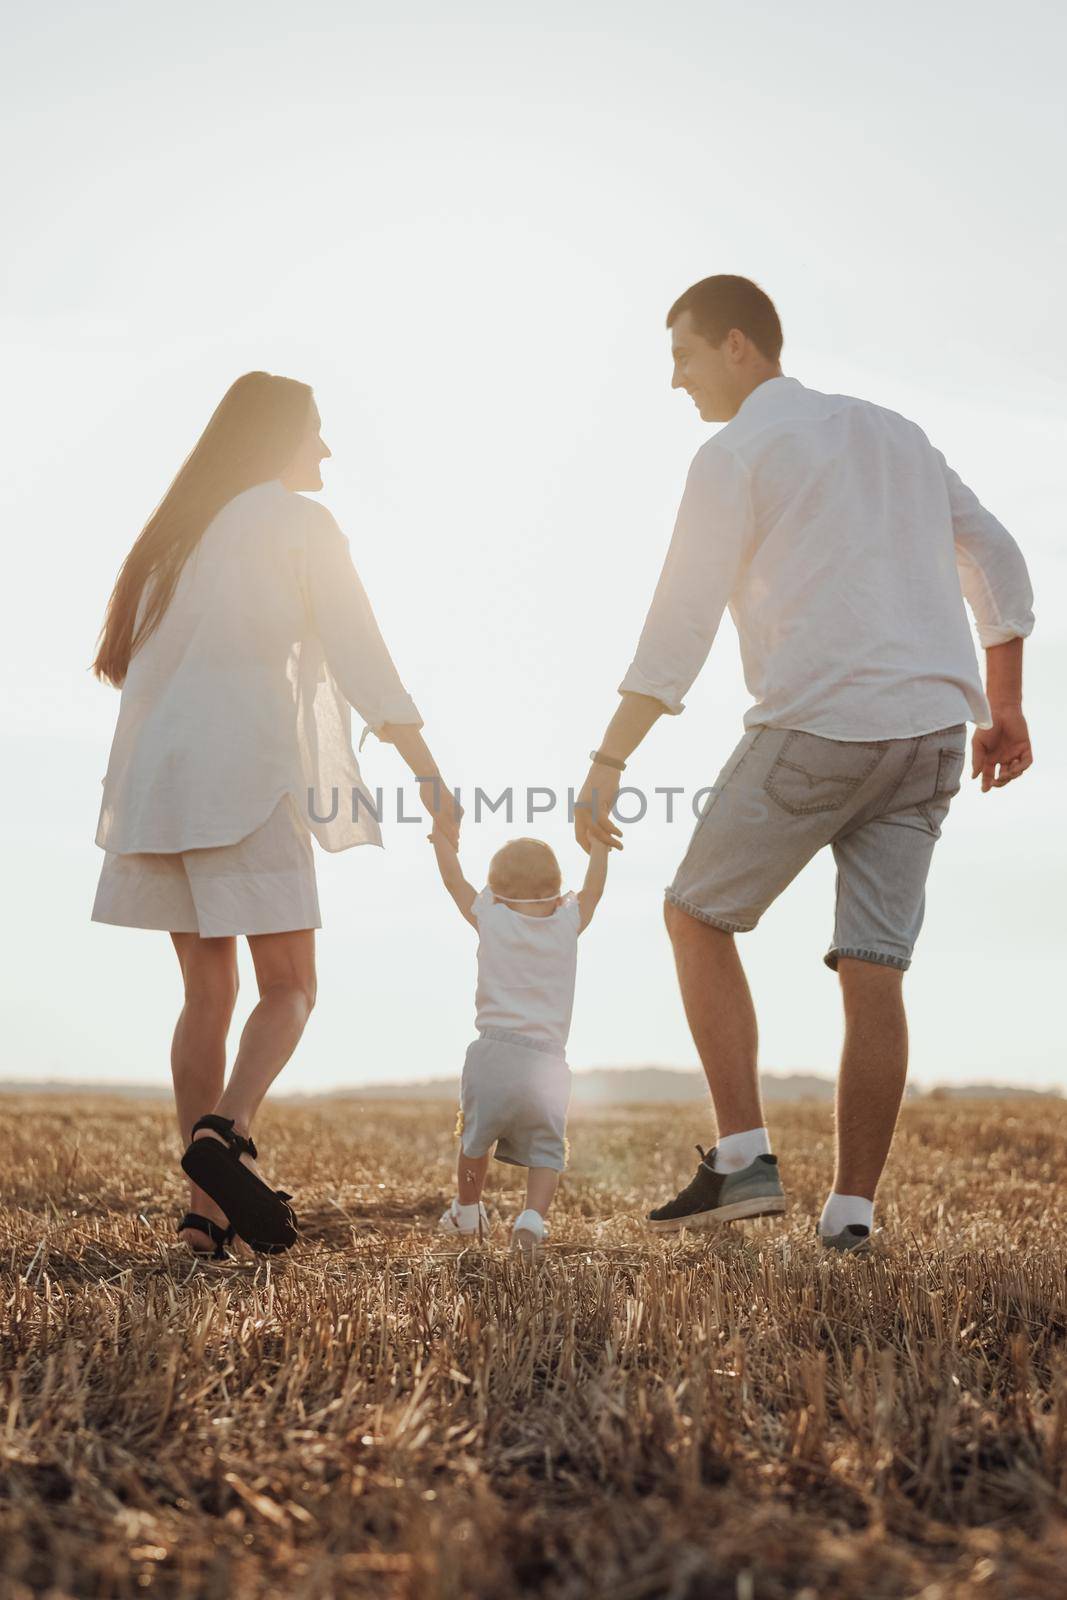 Back View of Mom and Dad Helping Their Child Making First Steps, Young Family Walking on Field at Sunset